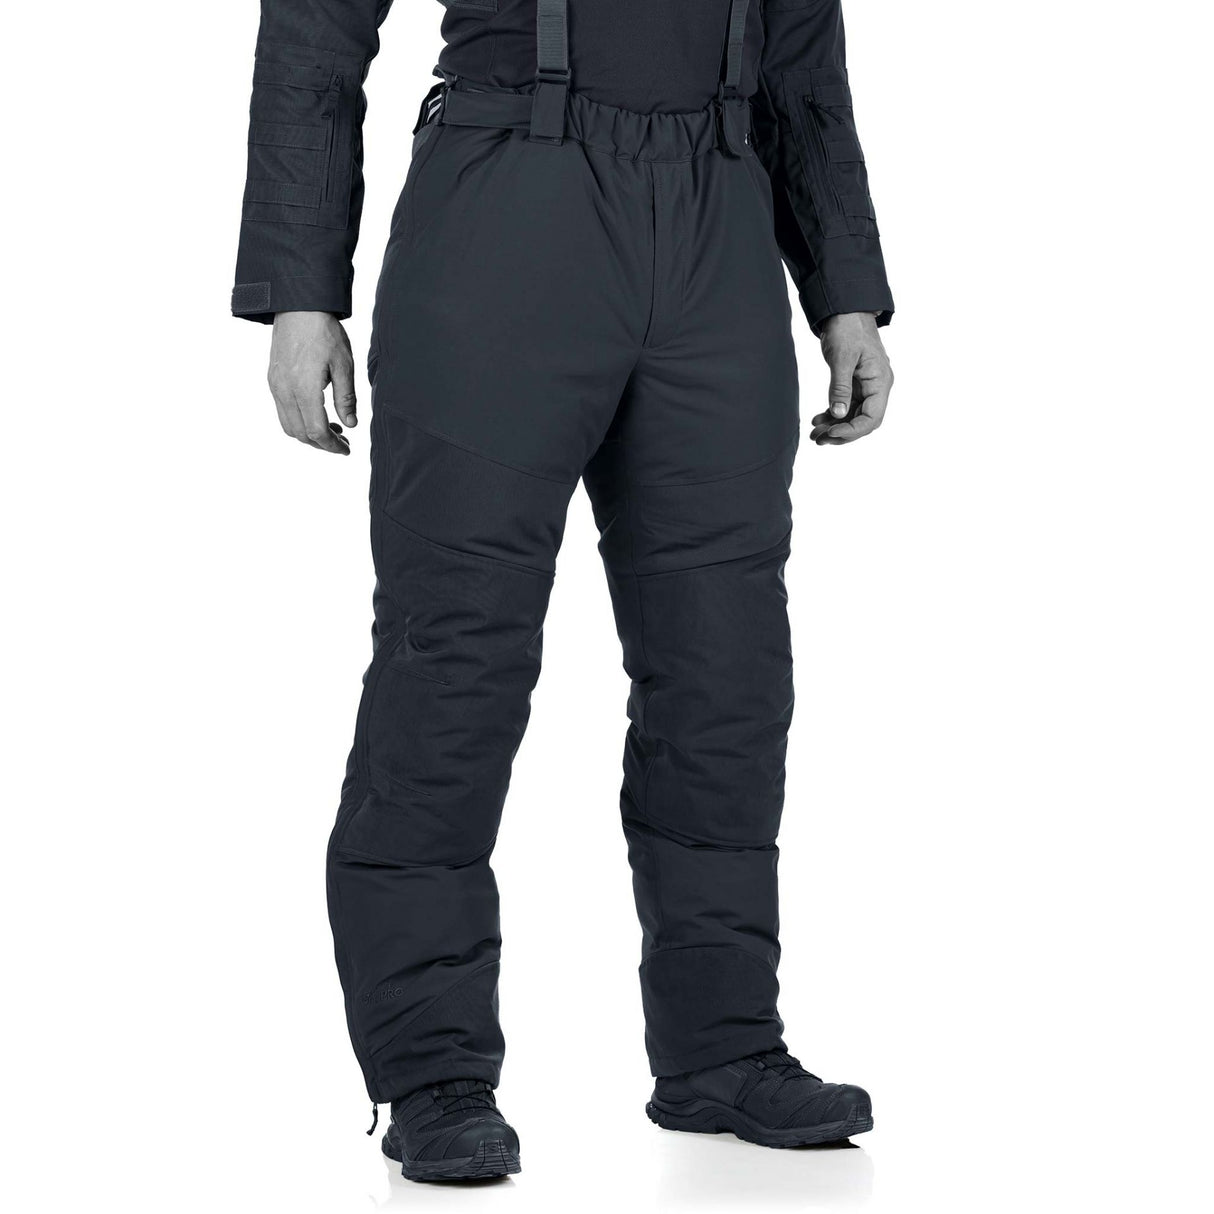 Delta OL 4.0 Tactical Winter Pants: Adjustable fit with waist-width adjustments and detachable suspenders. Conquer cold weather with ease.